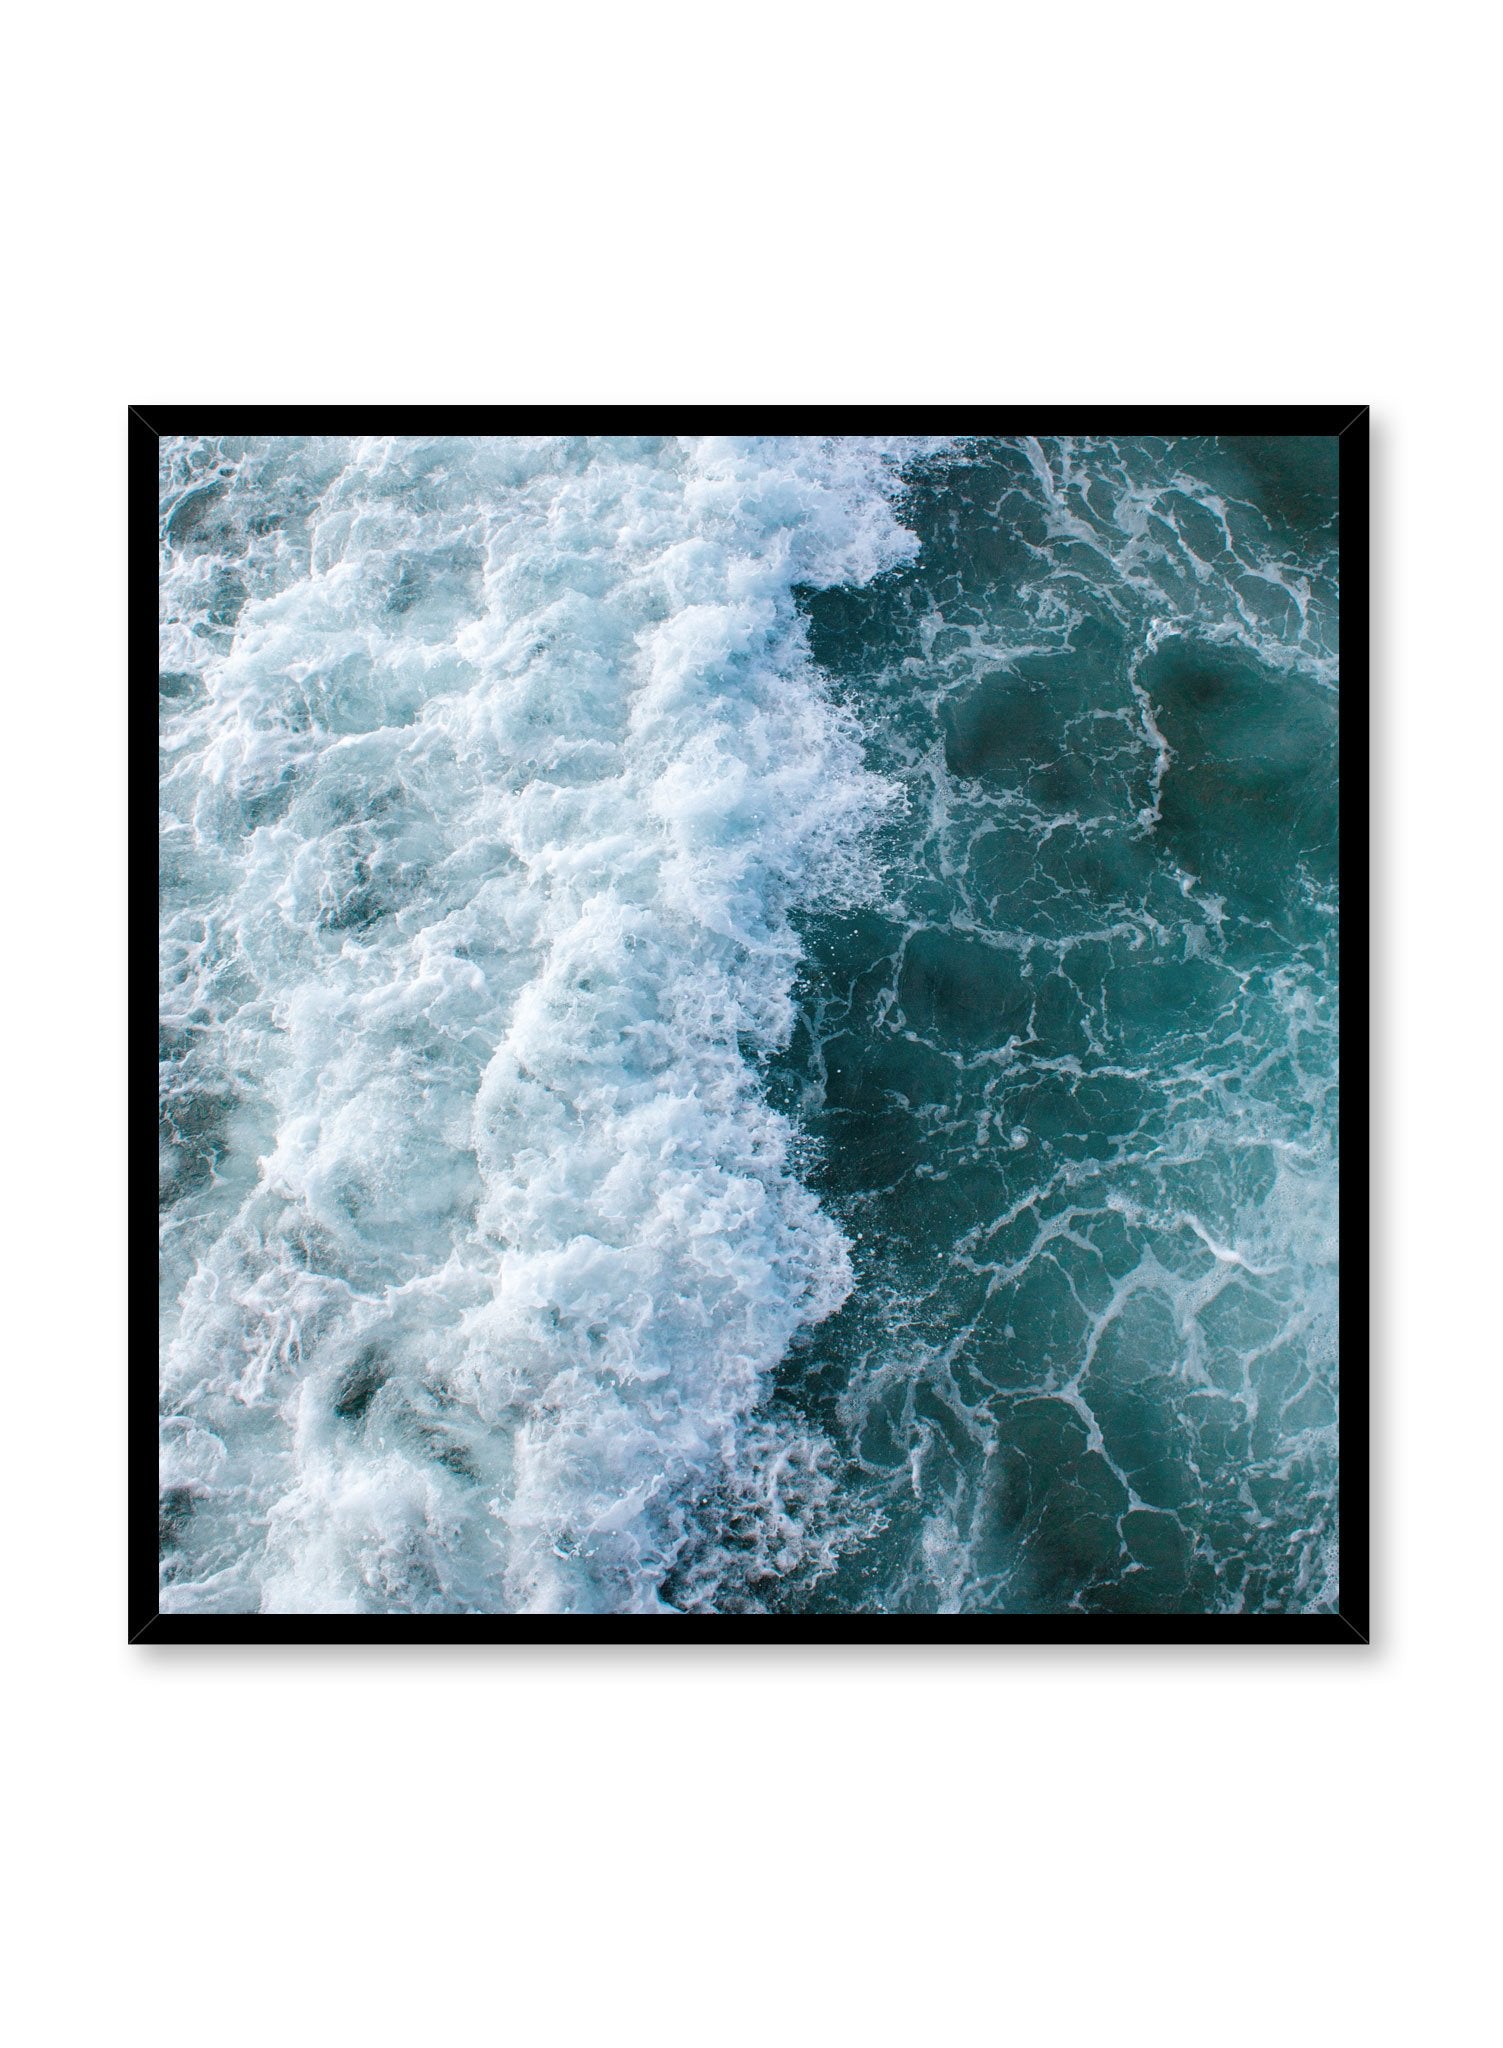 Modern minimalist poster by Opposite Wall with Emerald waters photography in square format